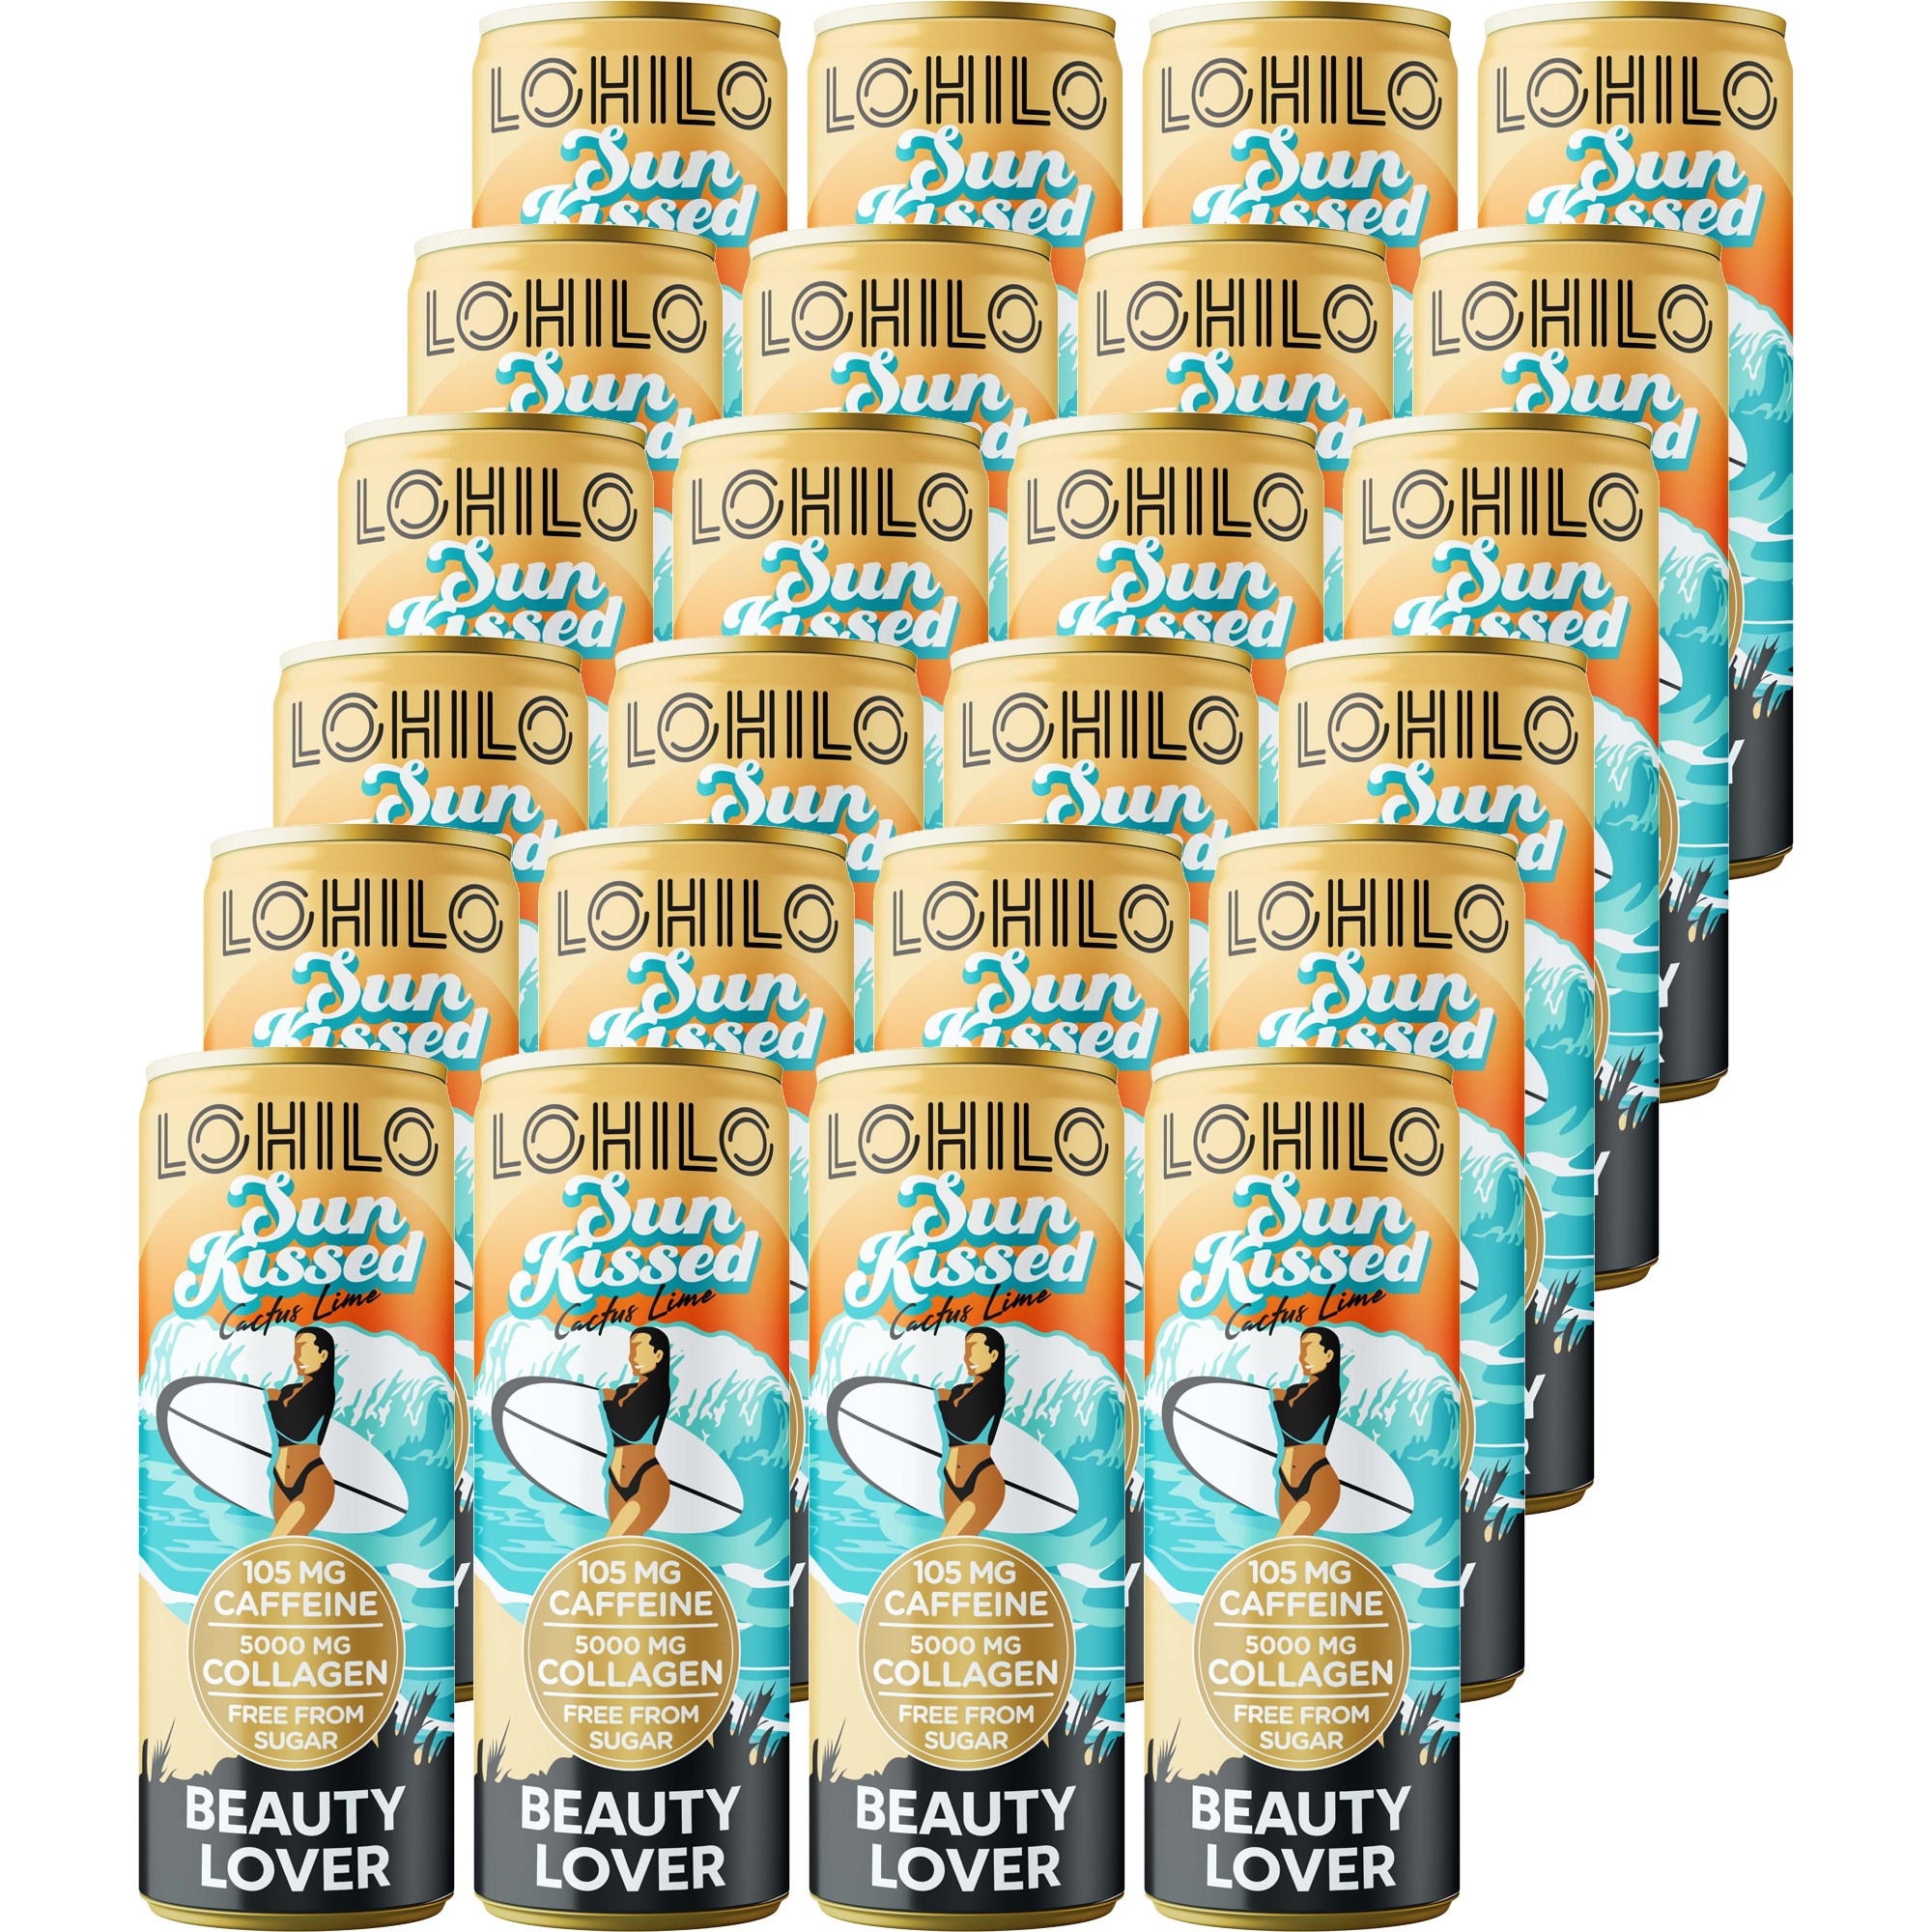 LOHILO Beauty Lover Sun Kissed Cactus Lime 24-Pack